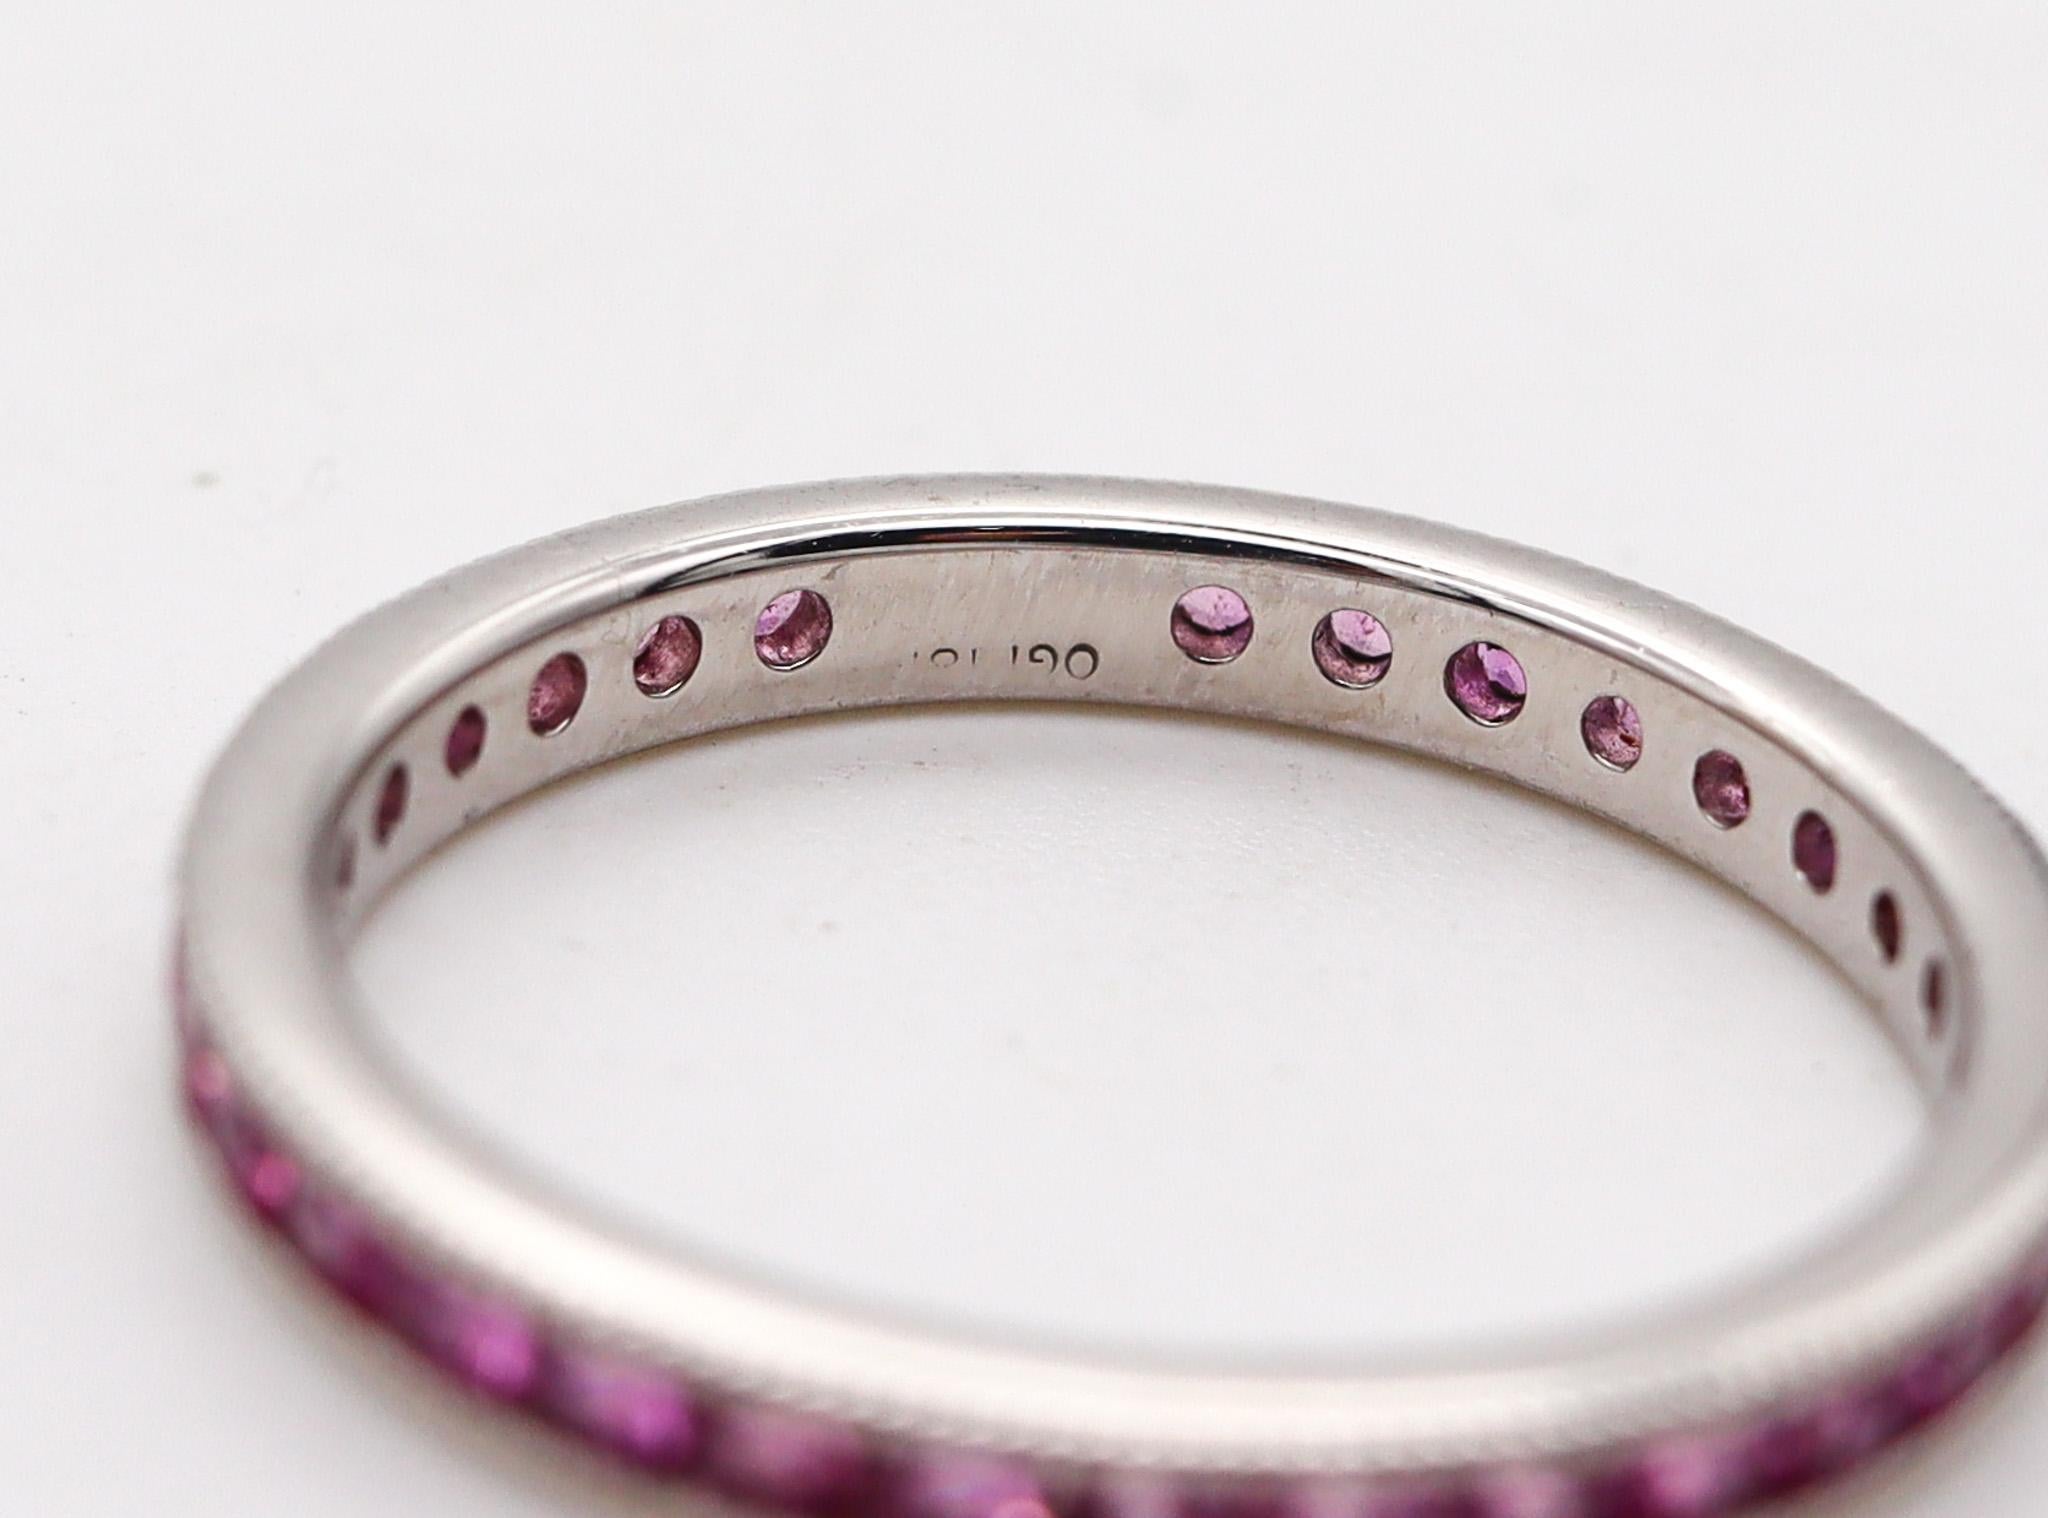 Ogi Eternity Band Ring in 18kt White Gold with 1.40ctw in Vivid Pink Sapphires In Excellent Condition For Sale In Miami, FL